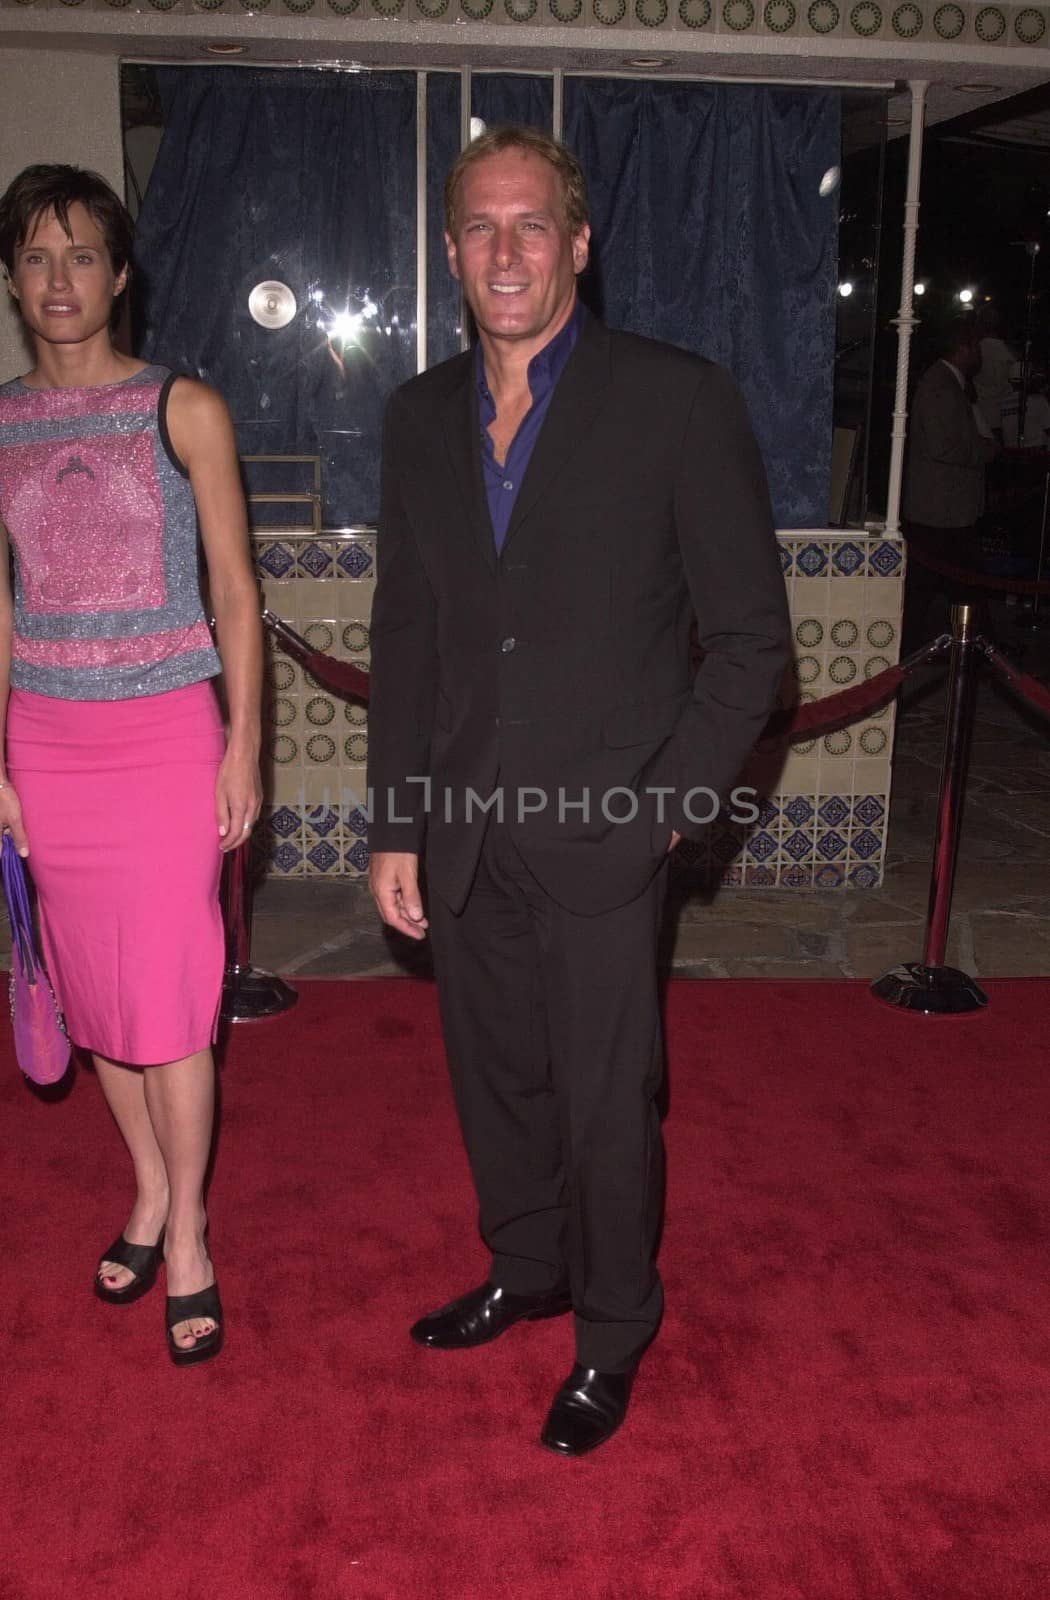 Michael Bolton at the premiere of "Space Cowboys" in Westwood. 08-01-00